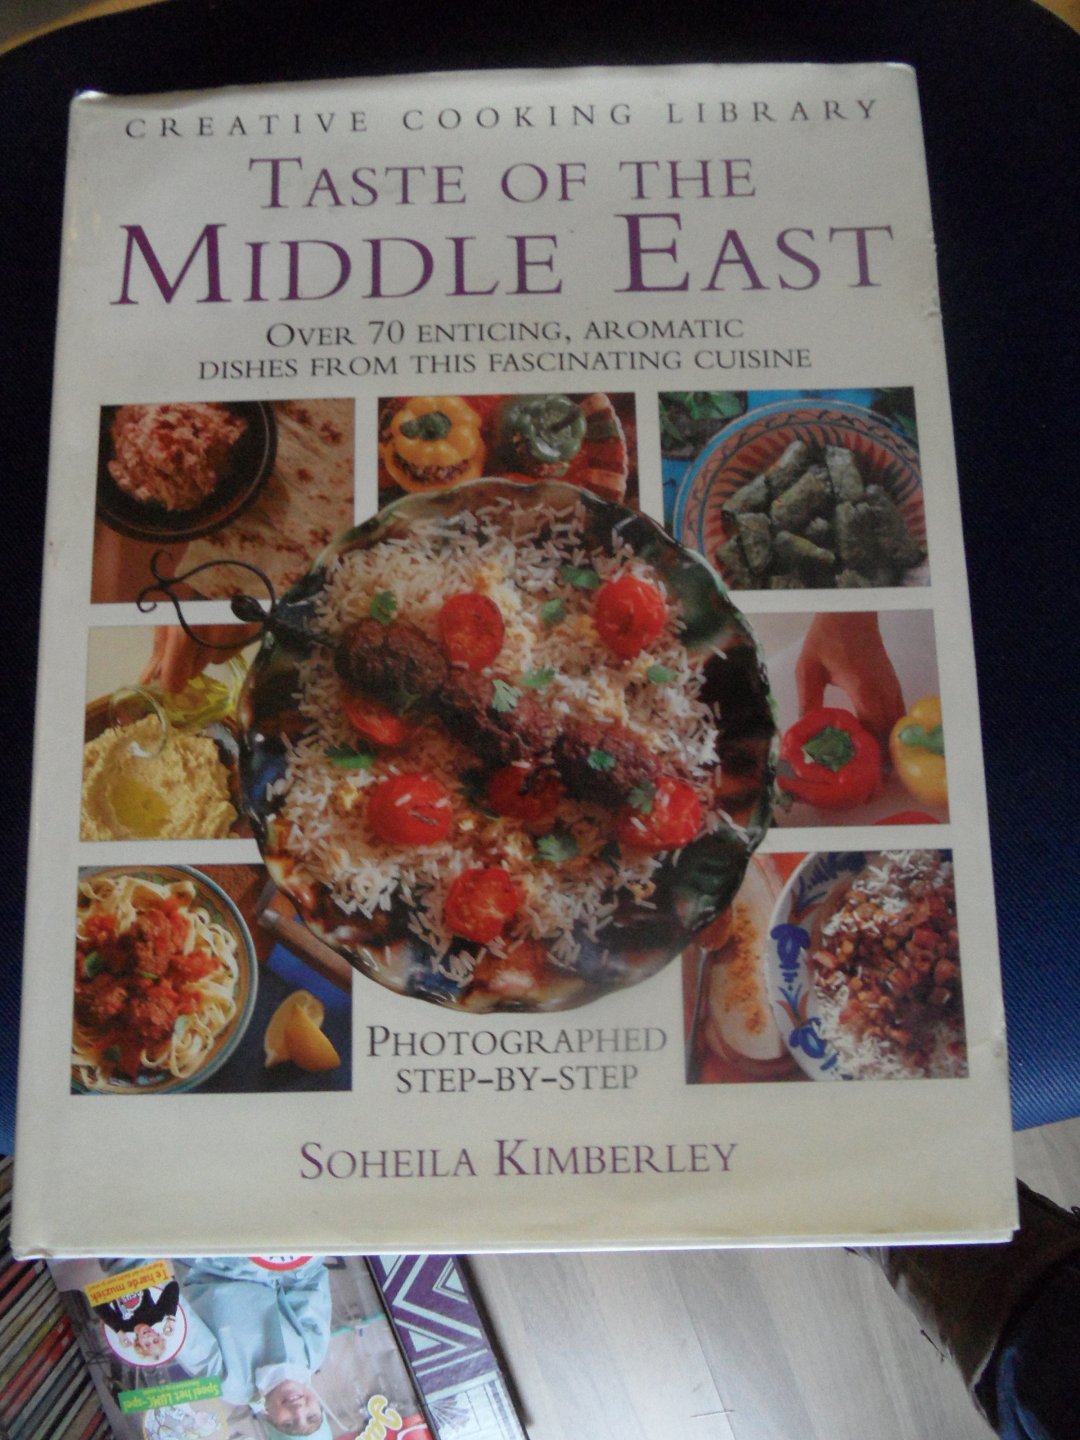 Kimberley, Soheila - Taste of the Middle East. Over 70 enticing, aromatic dishes from this fascinating cuisine.